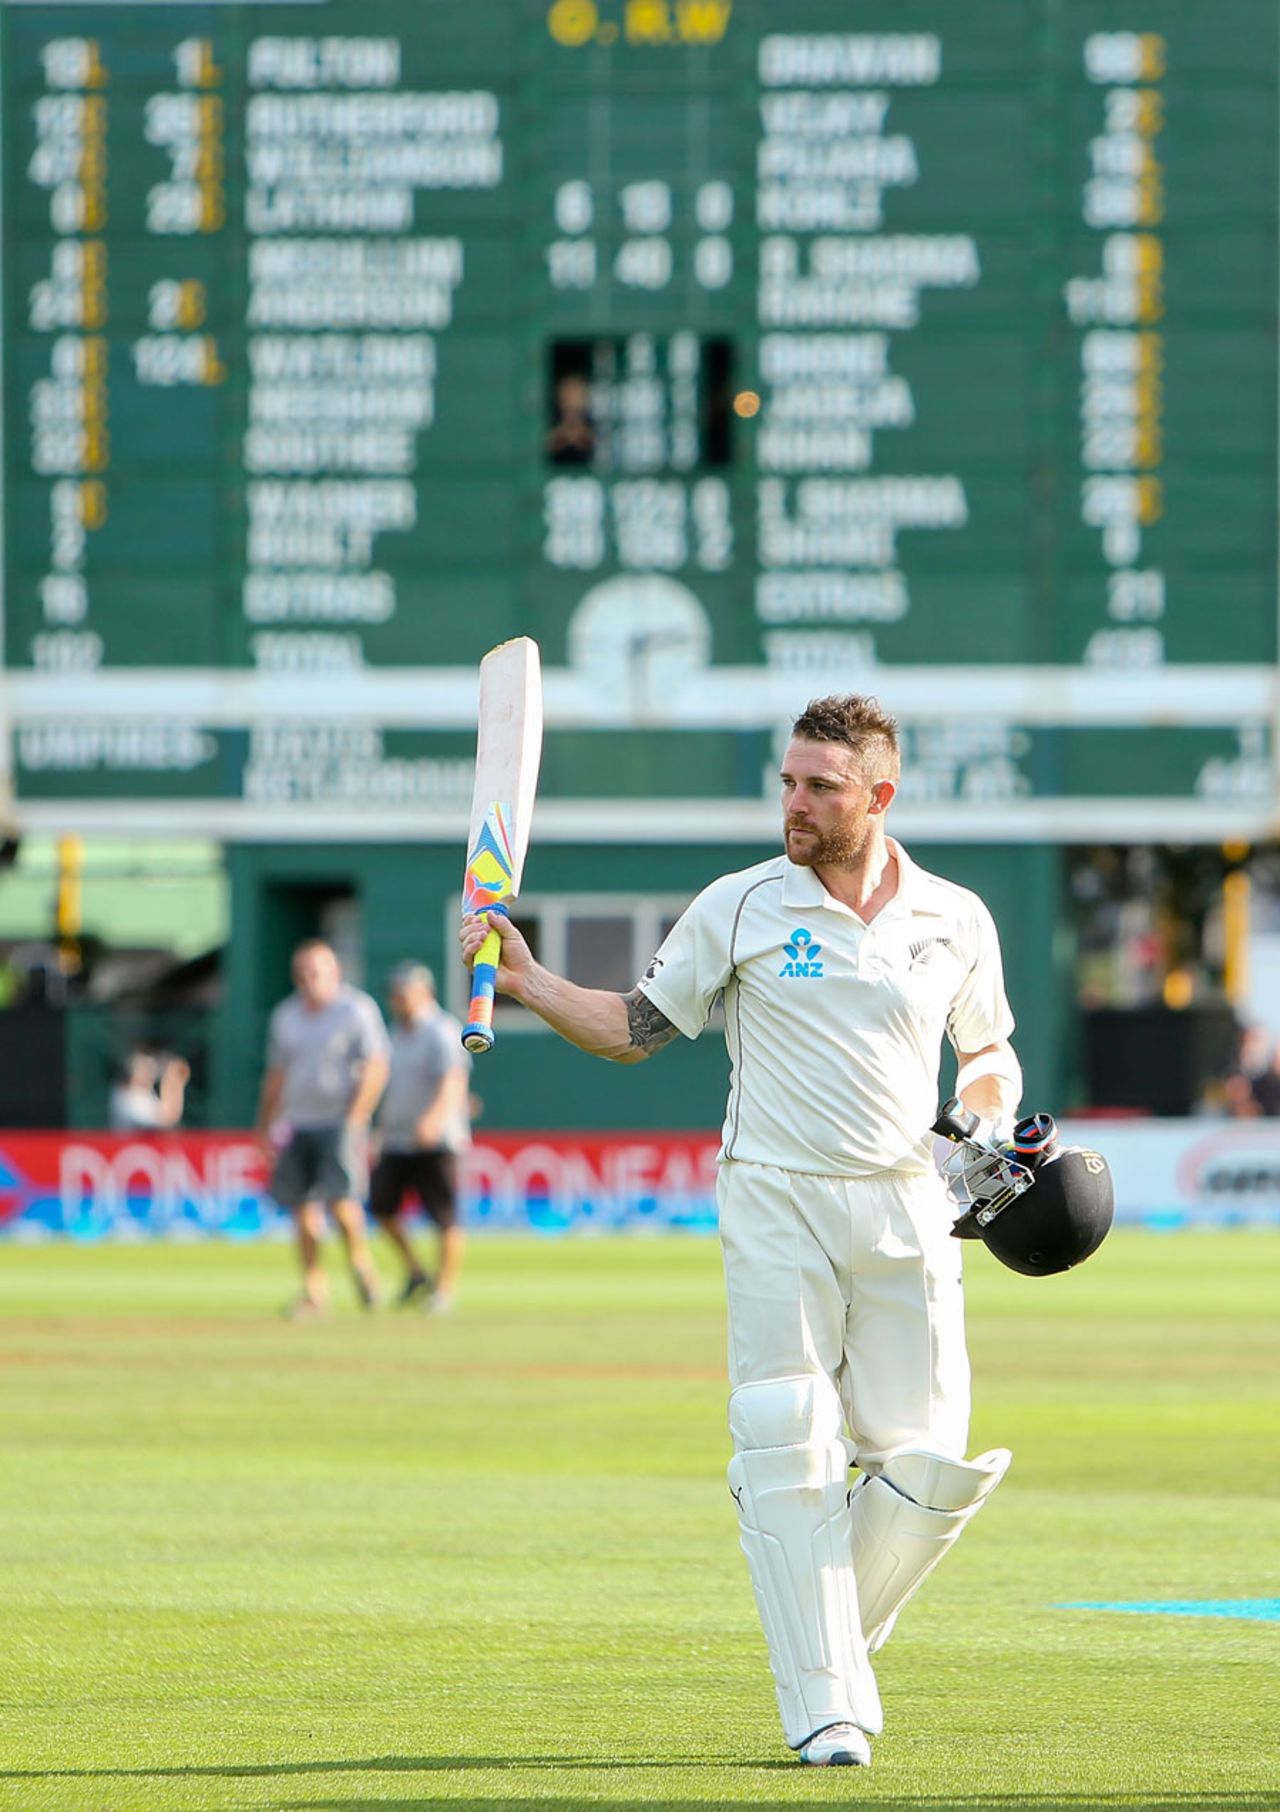 Brendon McCullum, on 281*, walks back after batting the entire day, 4th day, Wellington, February 17, 2014